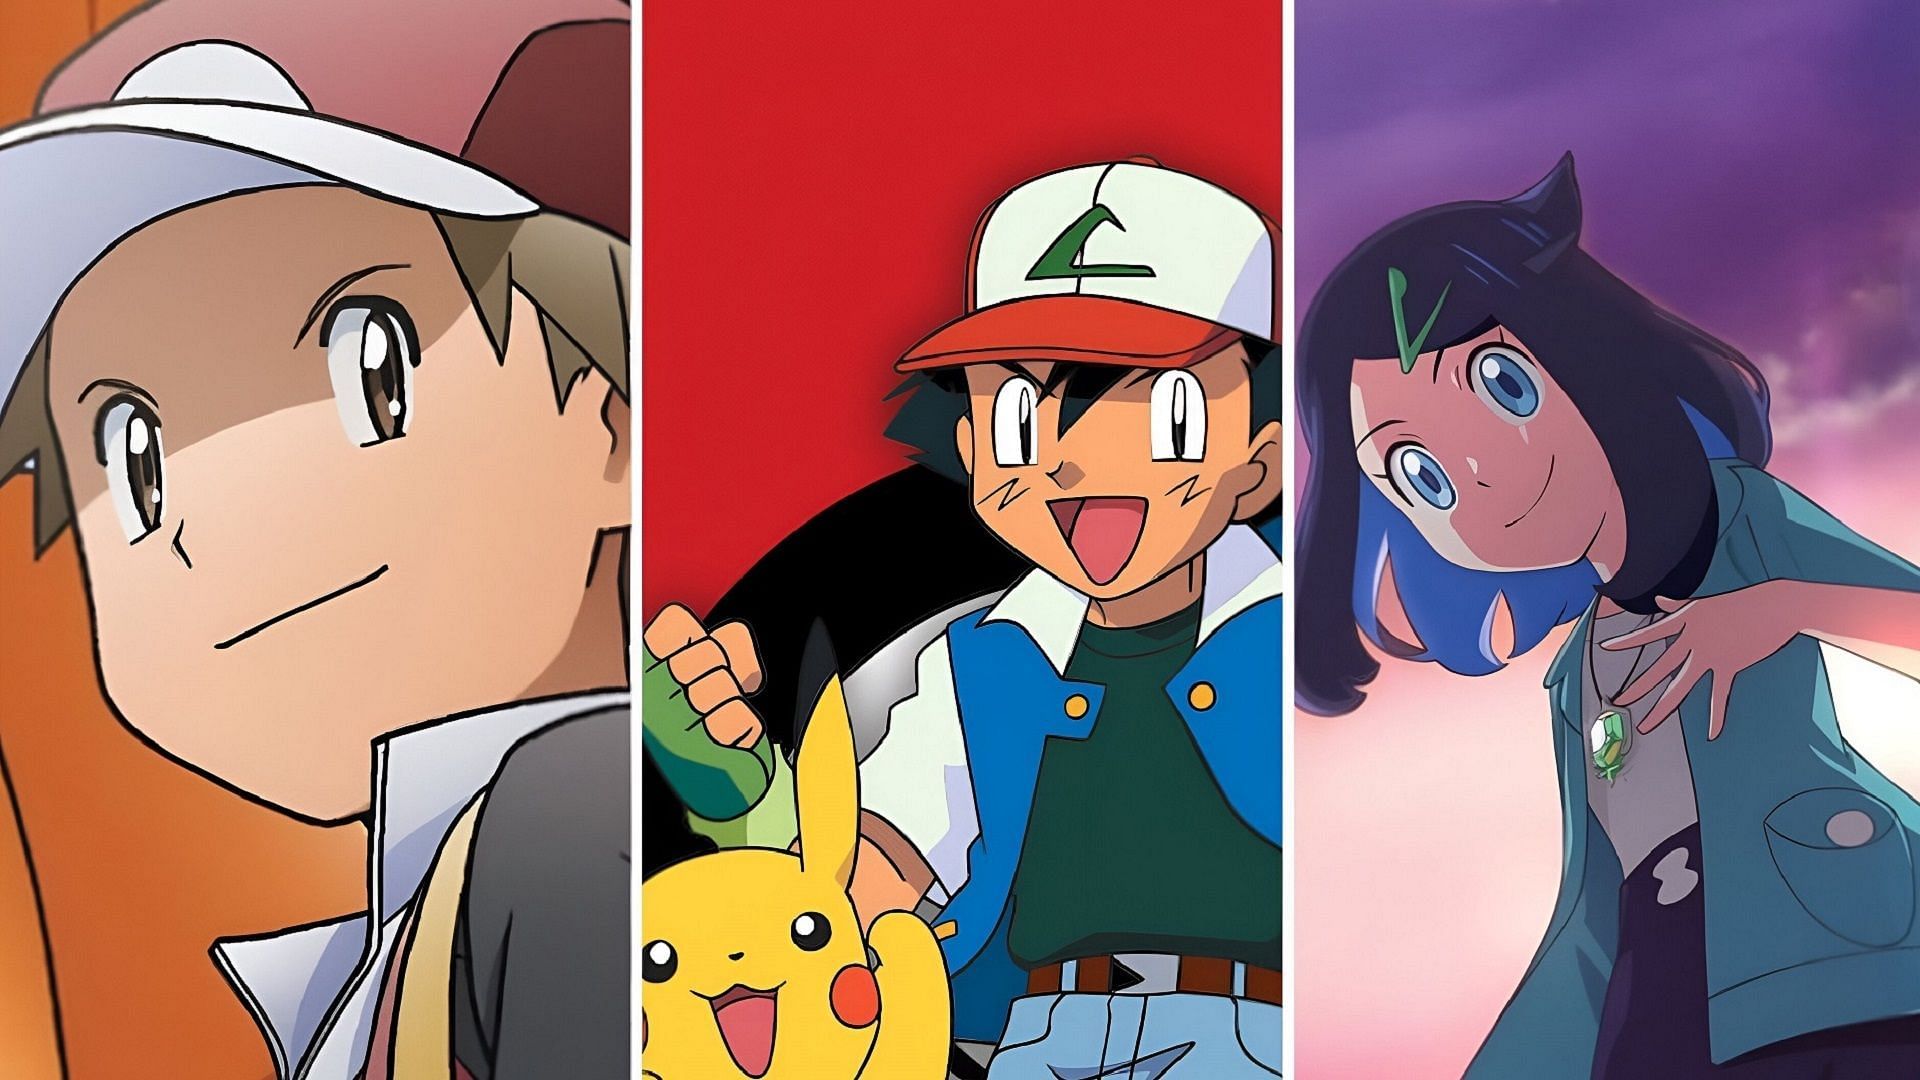 The Pokemon anime and its movies can be found on several platforms.